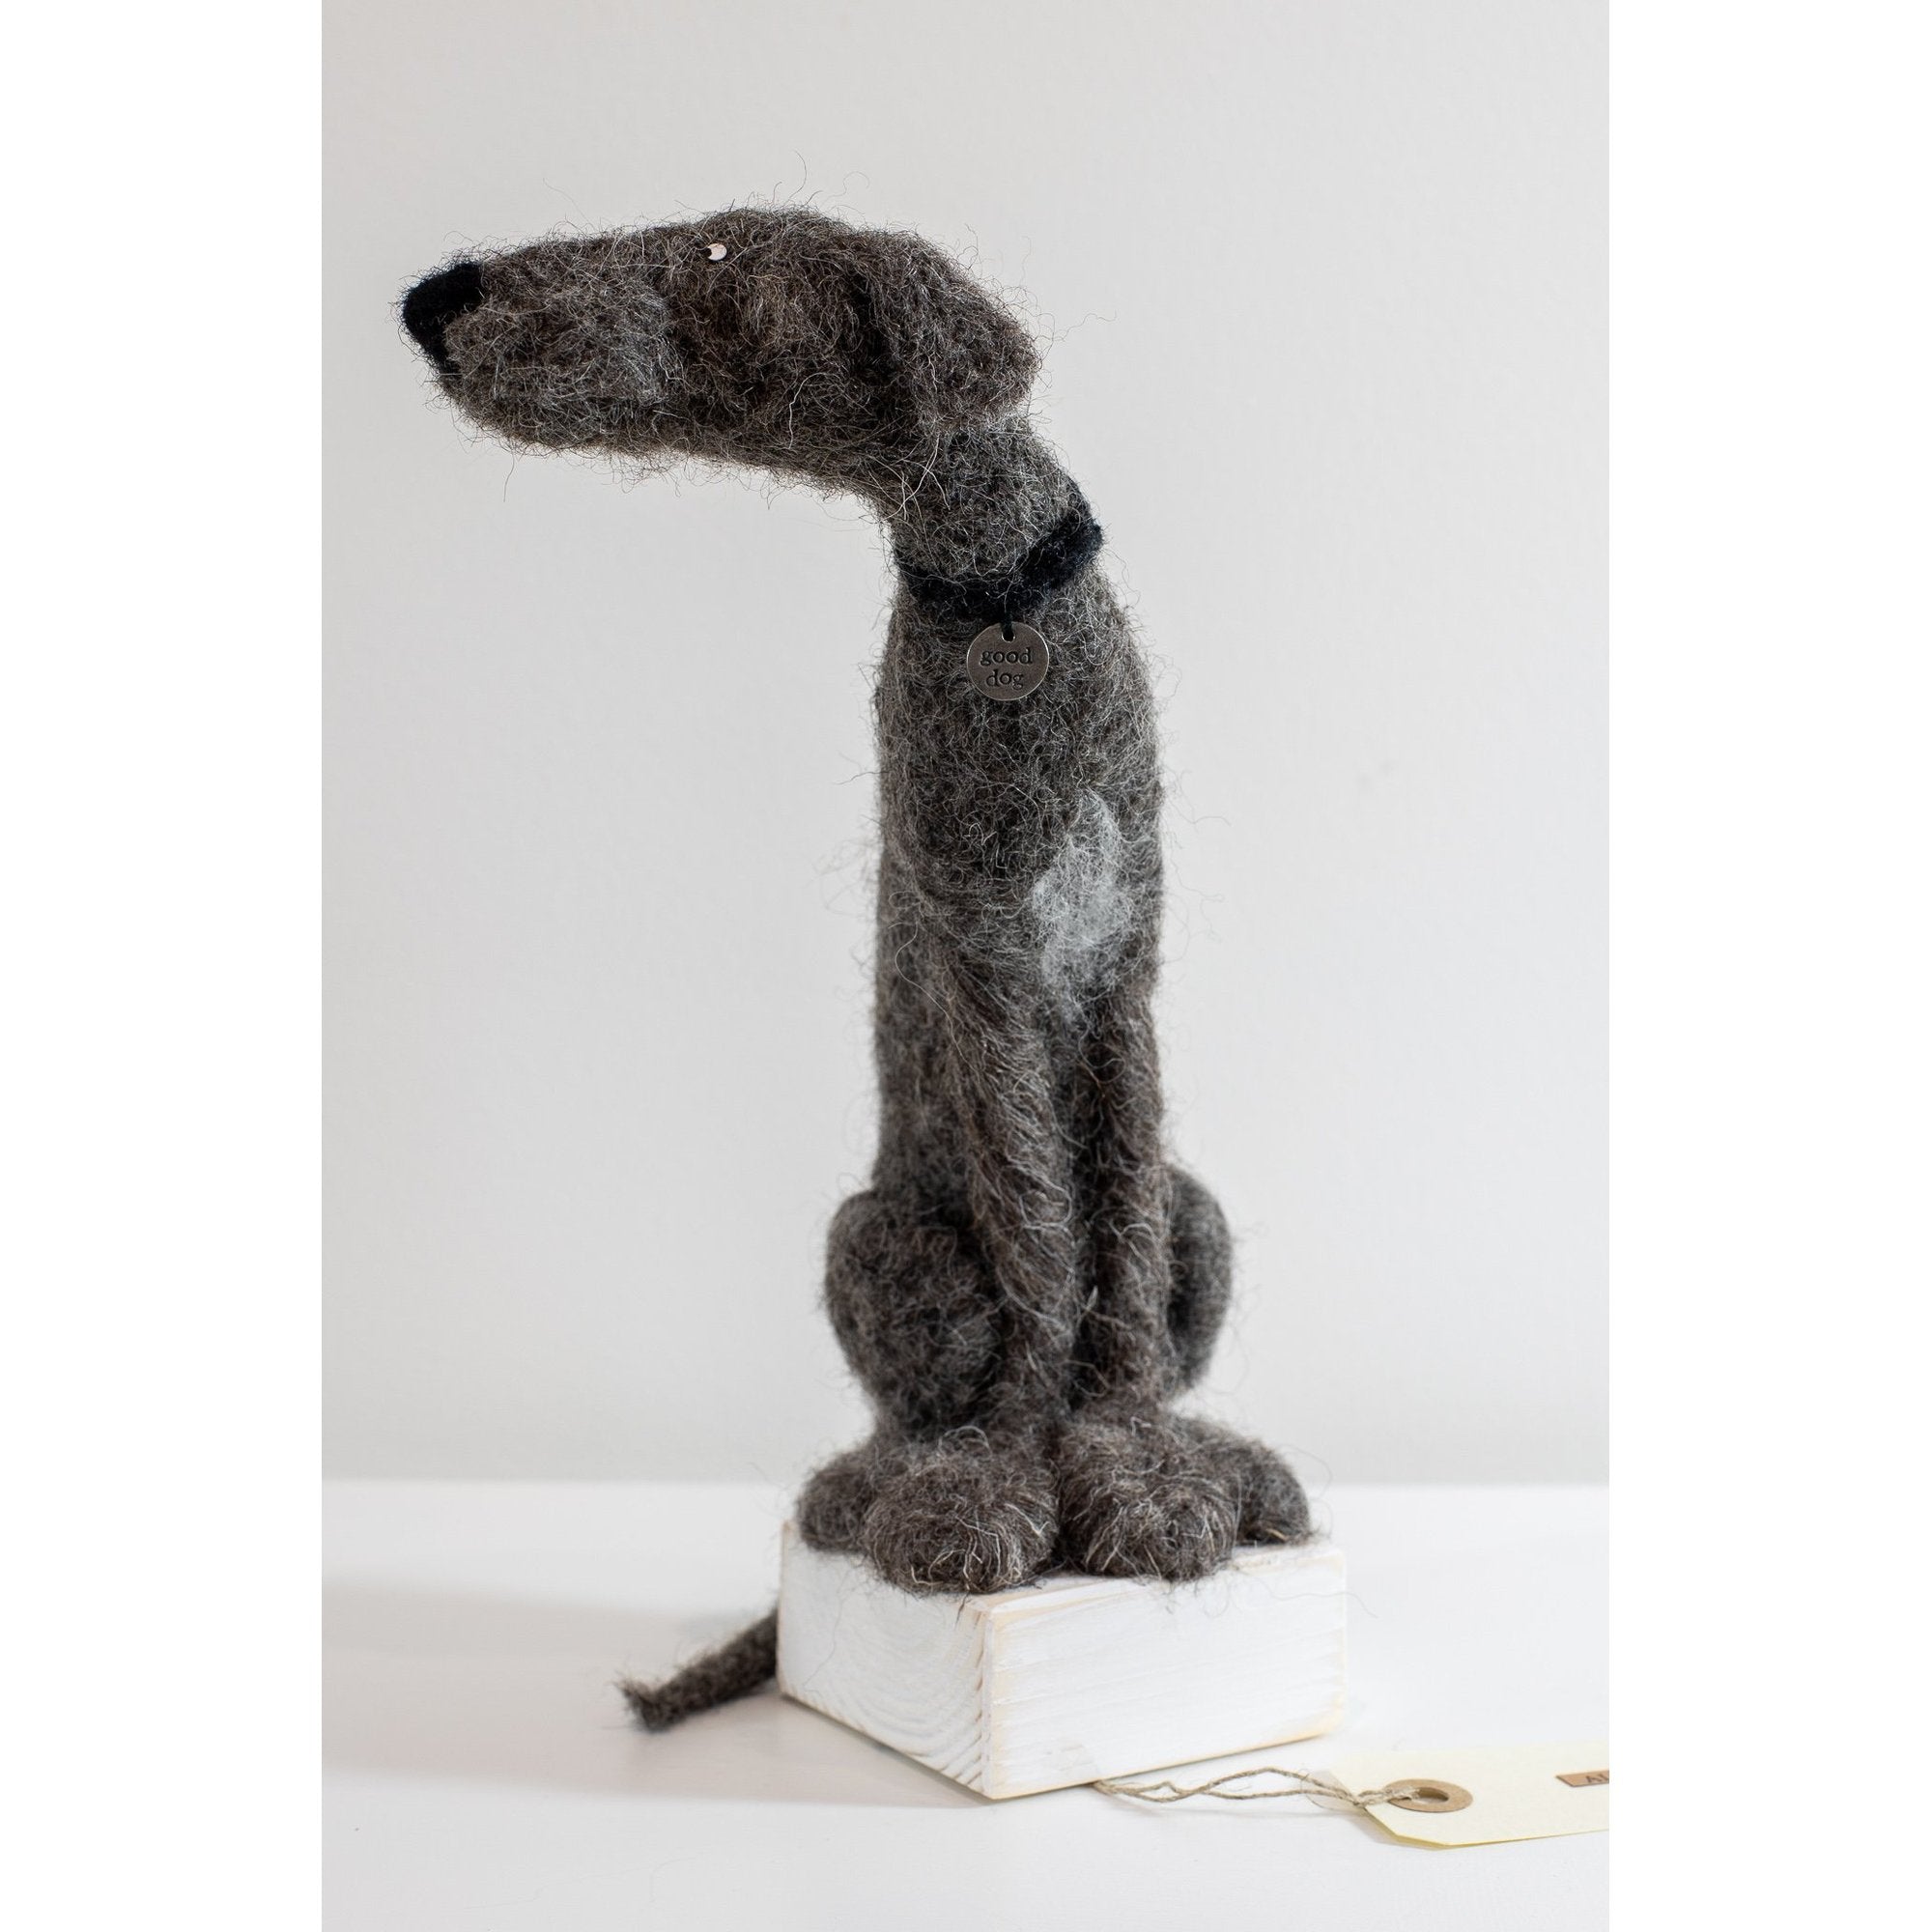 'Albie' needlefelt original by Kate Toms, available at Padstow Gallery, Cornwall